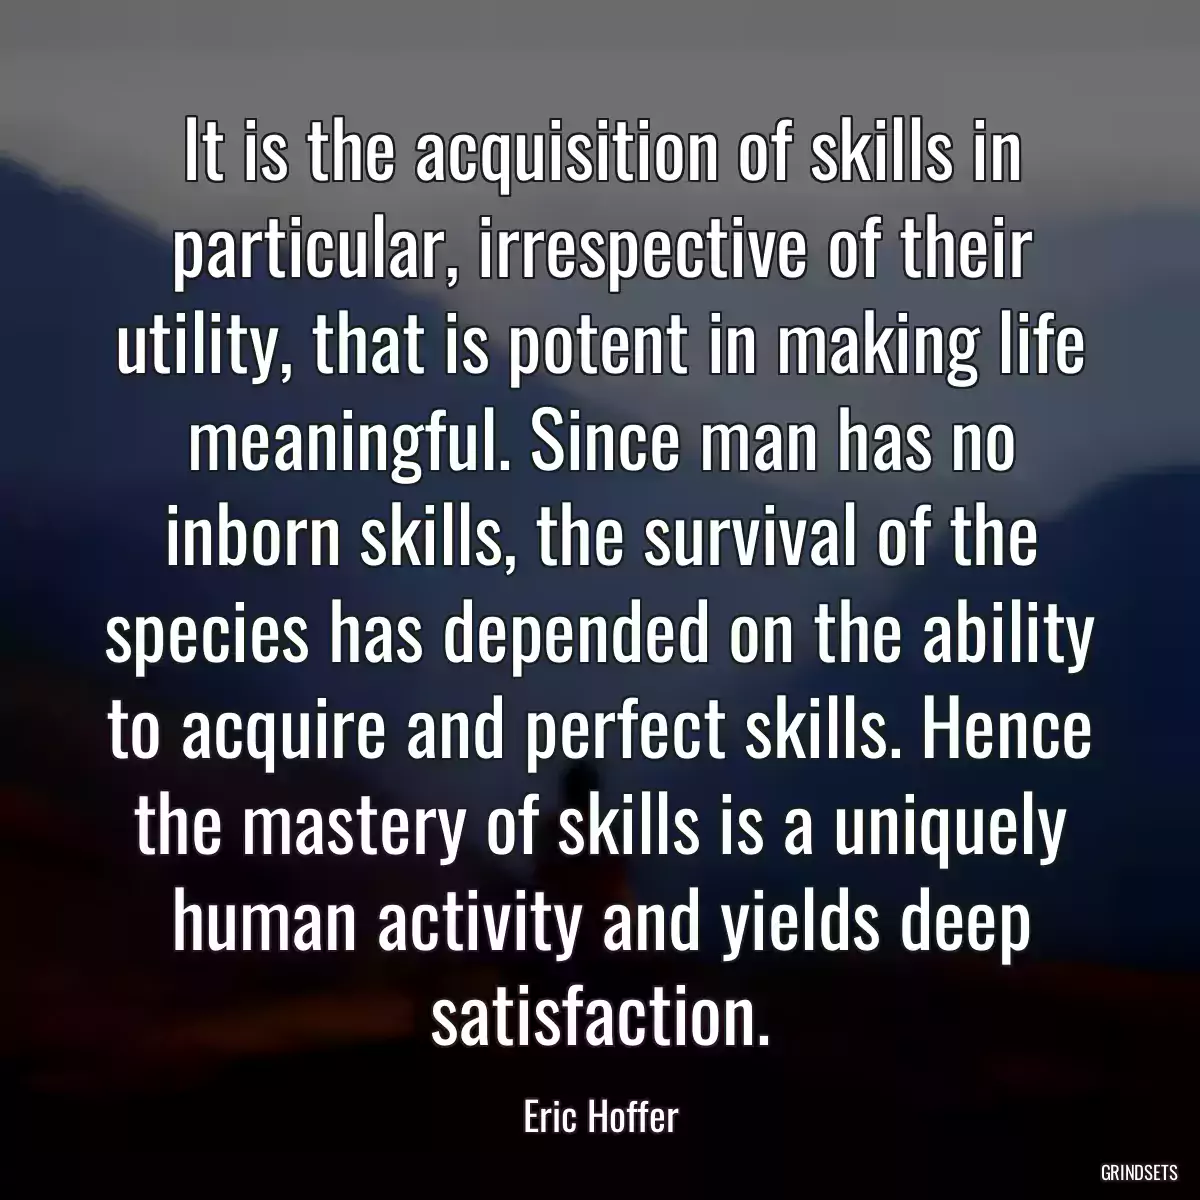 It is the acquisition of skills in particular, irrespective of their utility, that is potent in making life meaningful. Since man has no inborn skills, the survival of the species has depended on the ability to acquire and perfect skills. Hence the mastery of skills is a uniquely human activity and yields deep satisfaction.